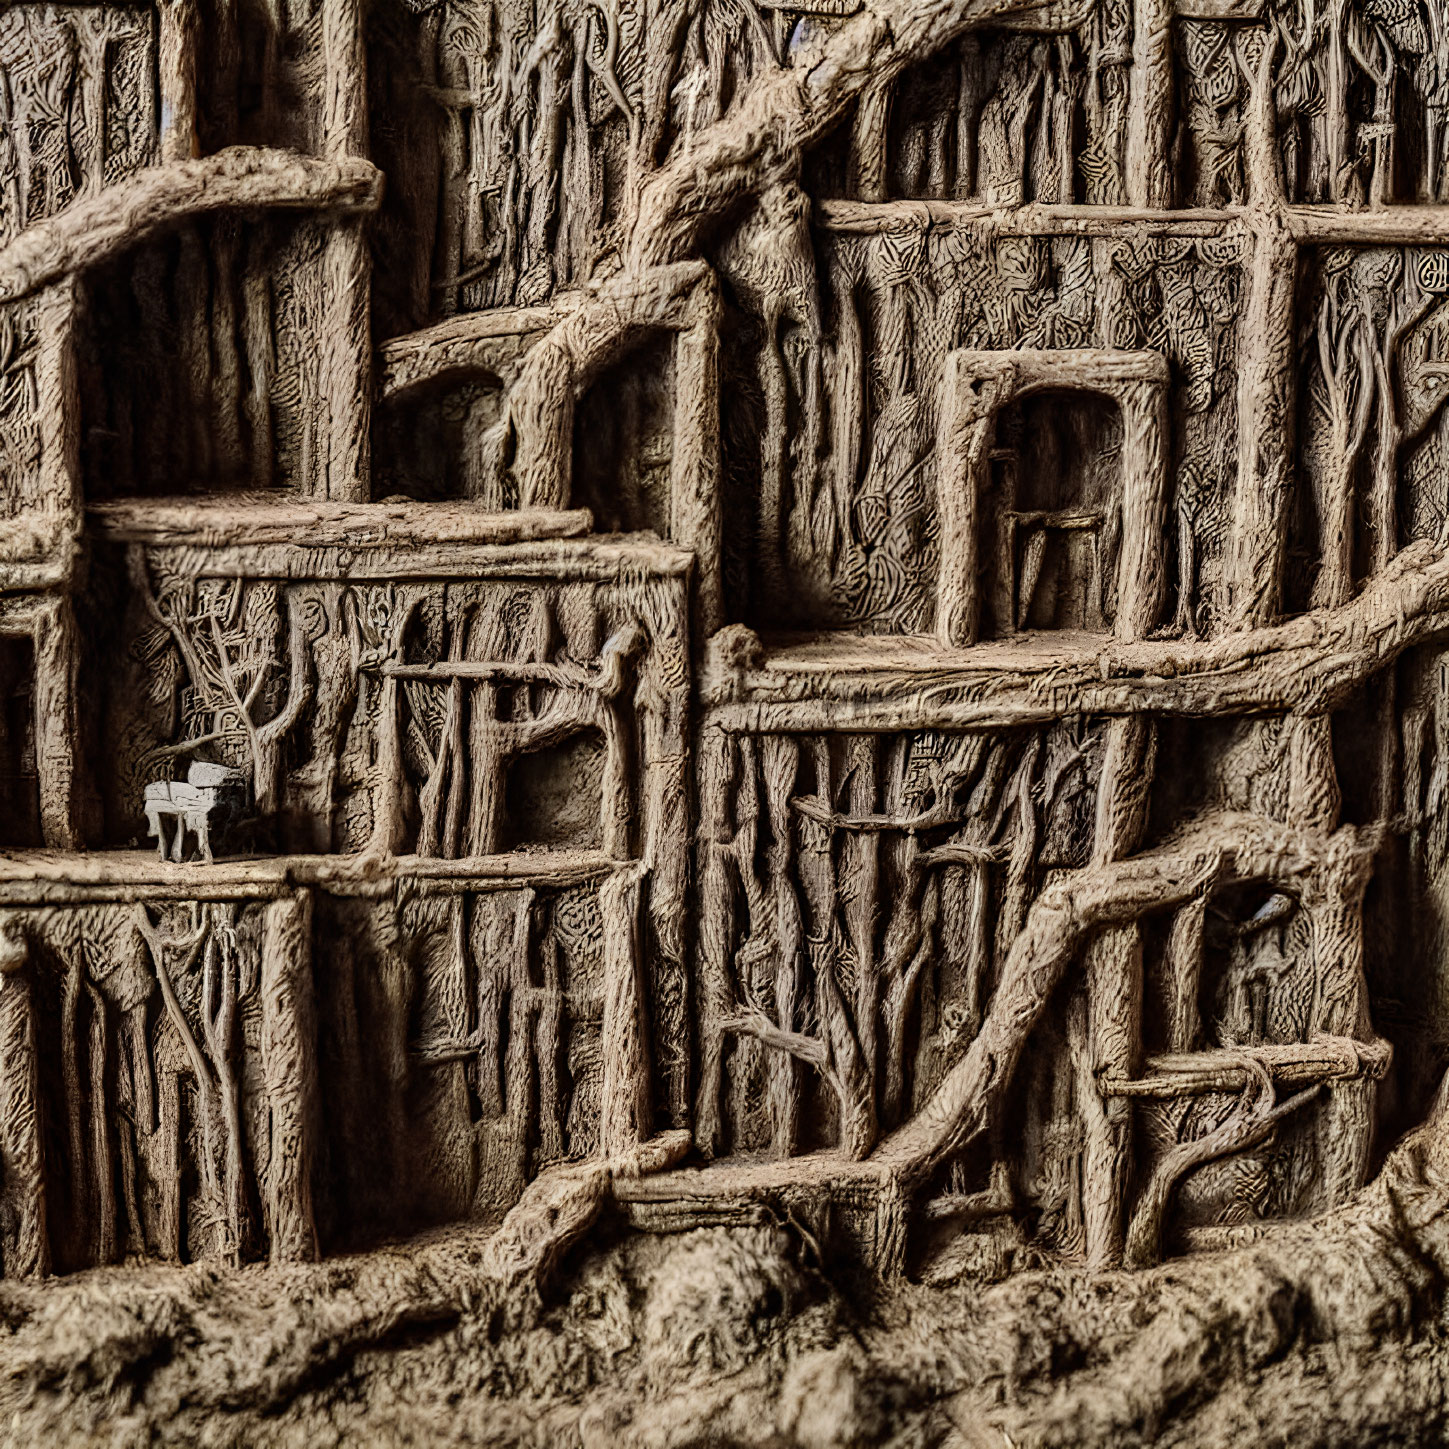 Intricate Wood Carving of Maze-Like Structure